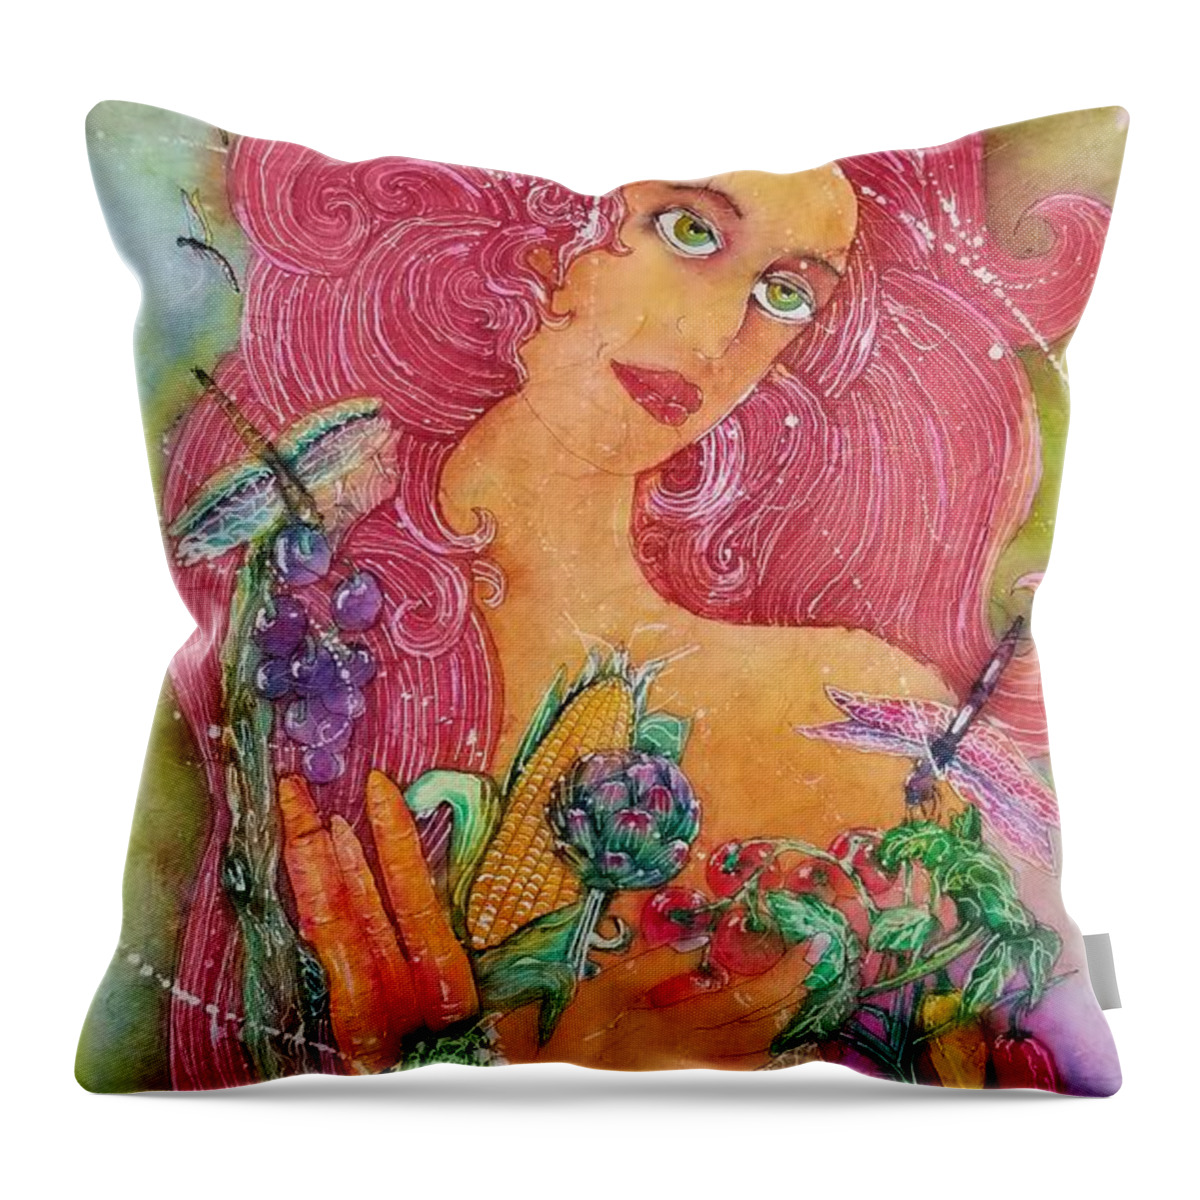 Vegetables Throw Pillow featuring the painting Garden Goddess of the Vegetables by Carol Losinski Naylor